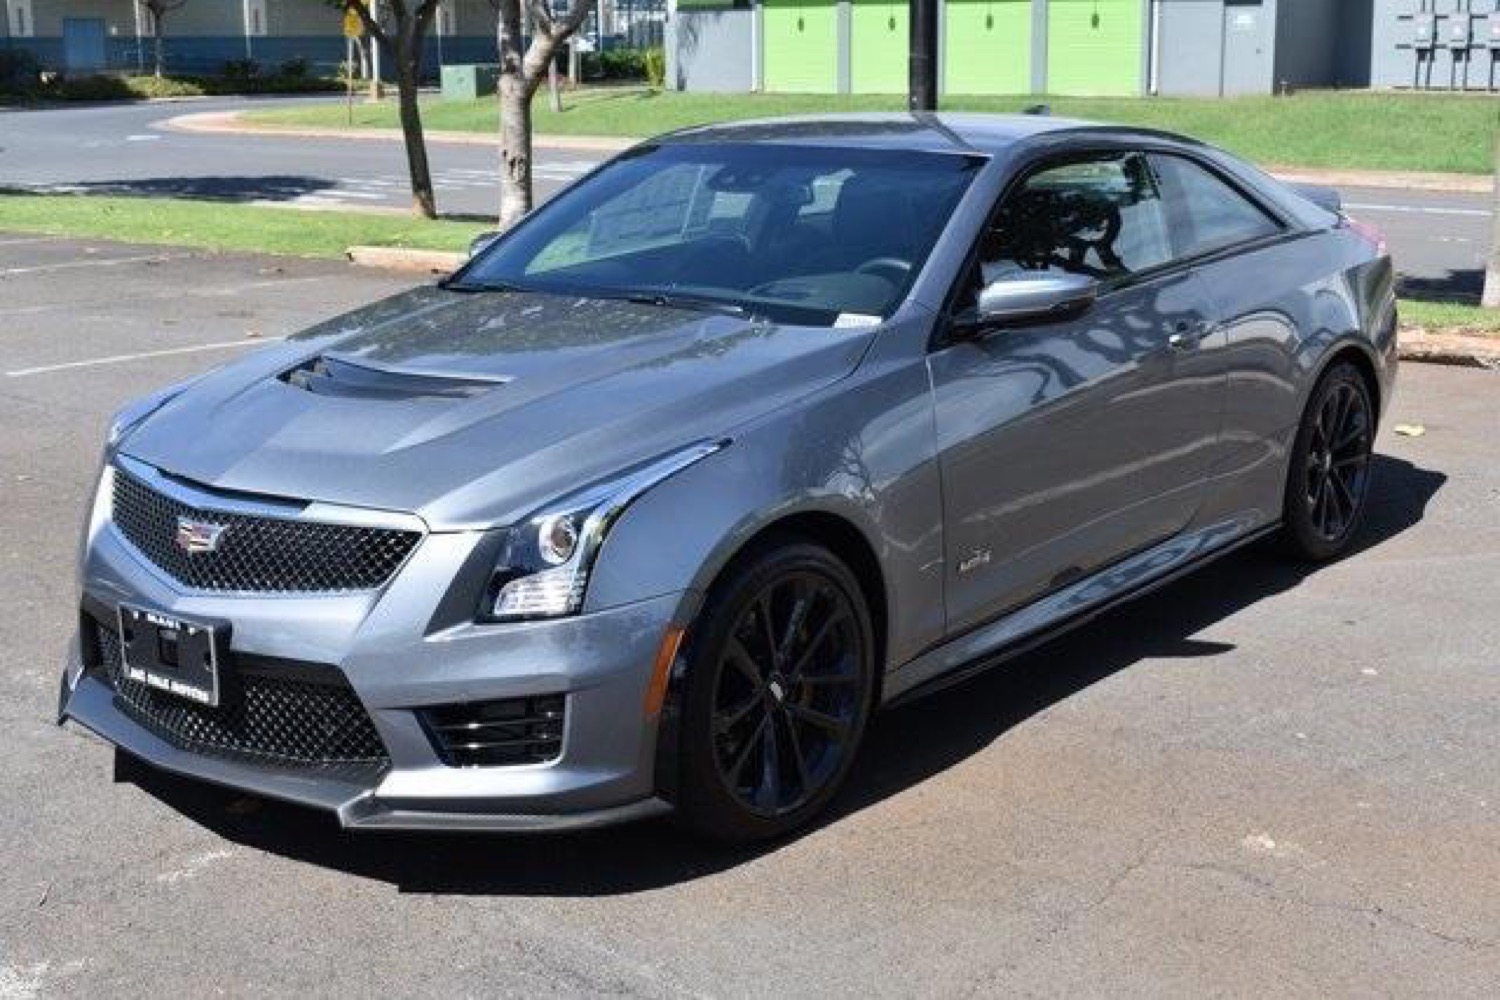 New 2018 Cadillac ATS-V Coupe Still For Sale In Hawaii